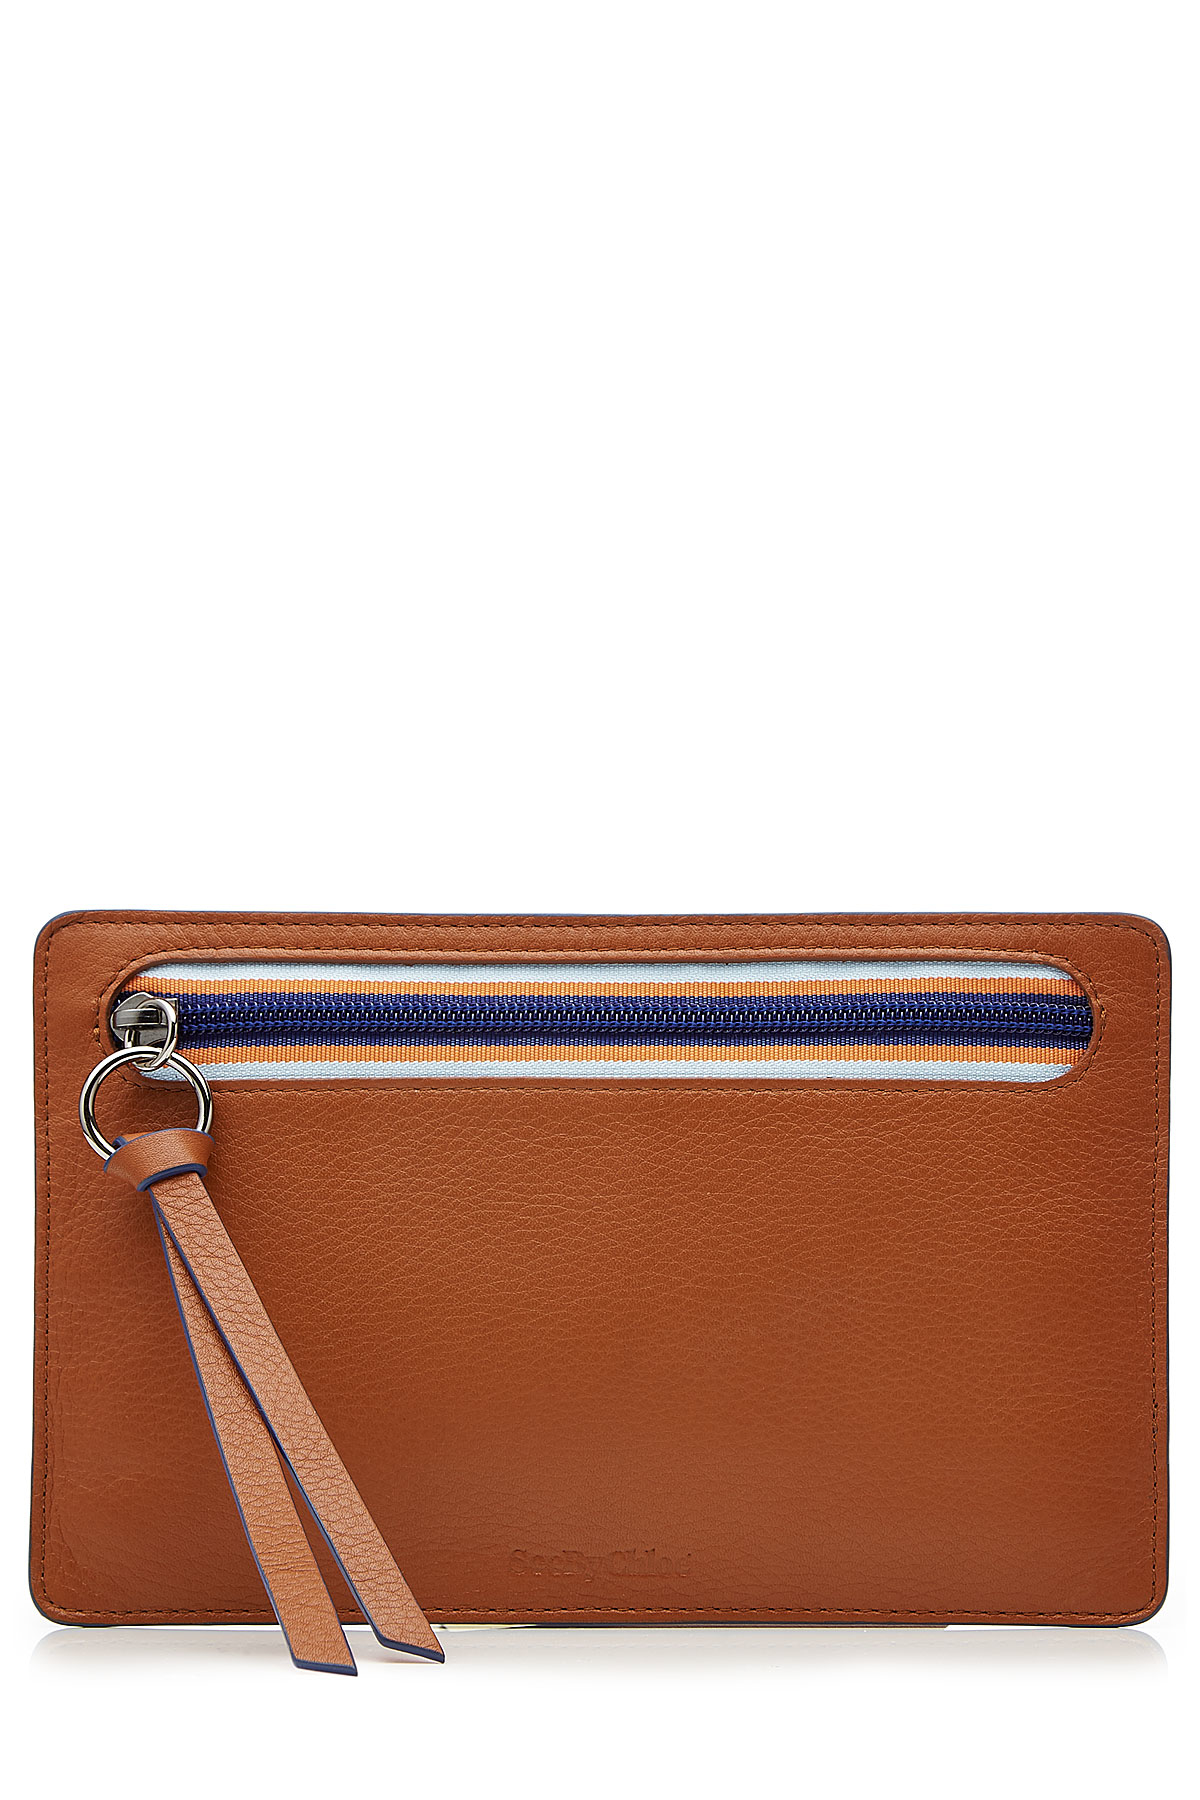 See by chlo See By Chlo Leather Pouch With Contrast Zip Trim ...